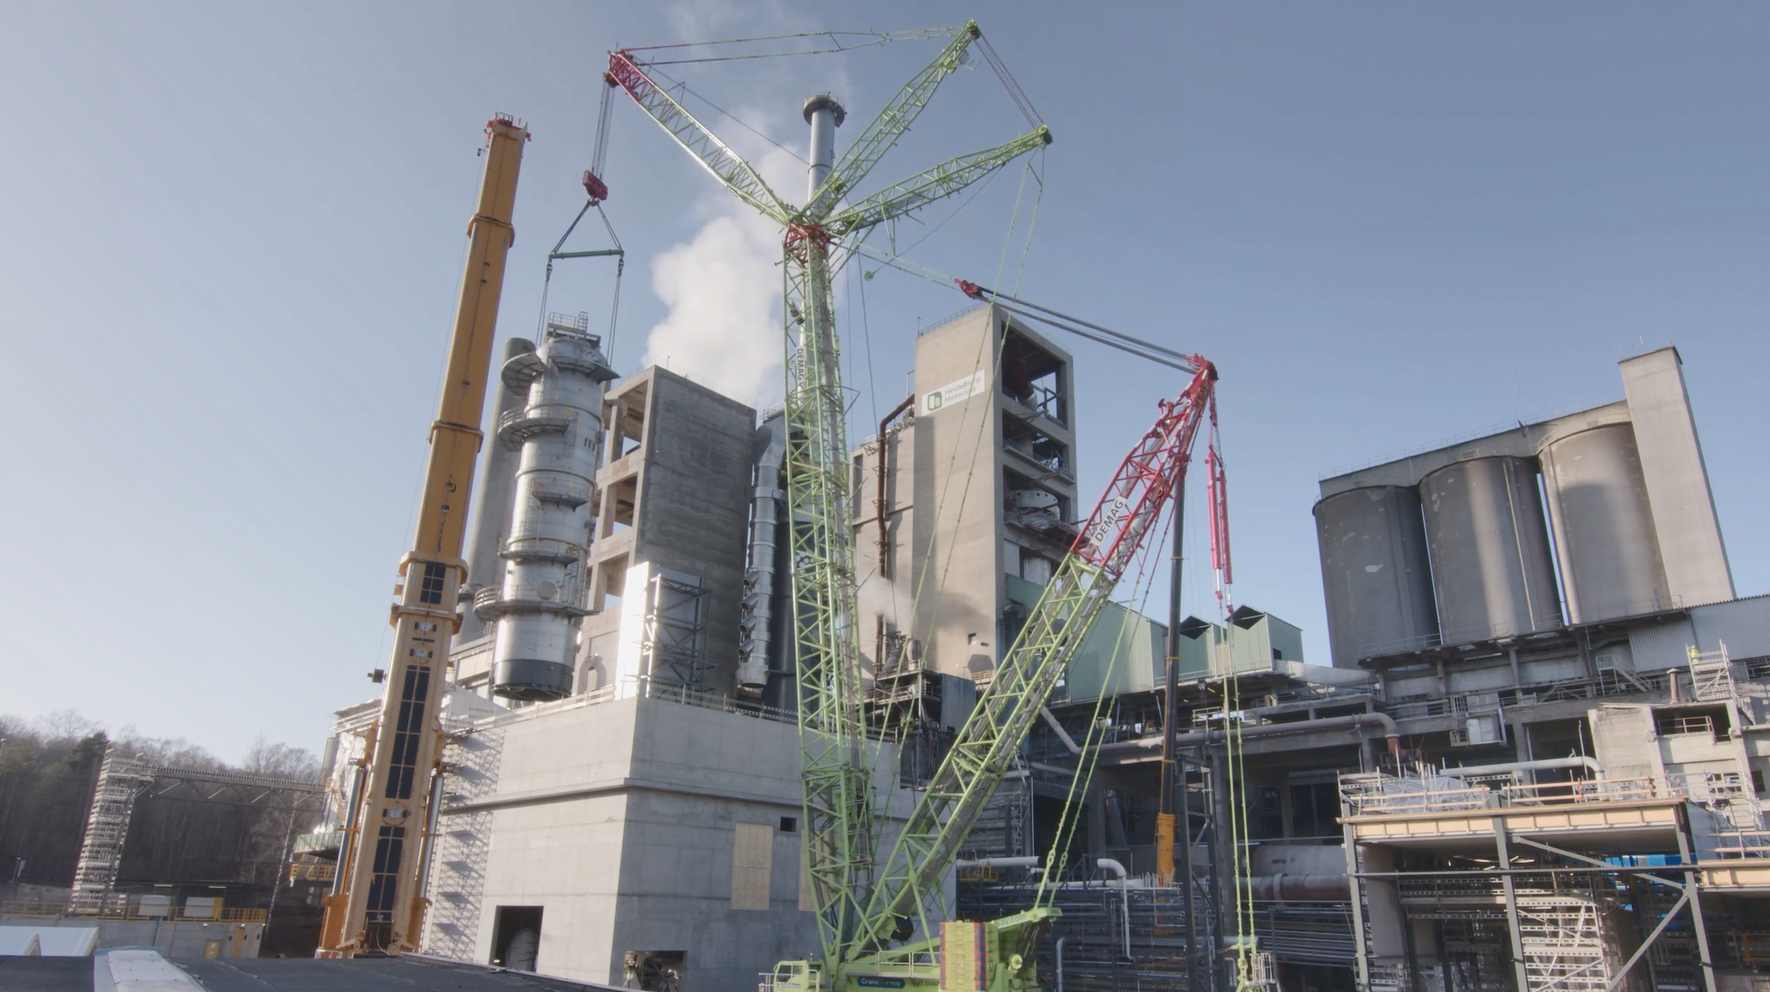 A green crane at a cement plant under a clear sky